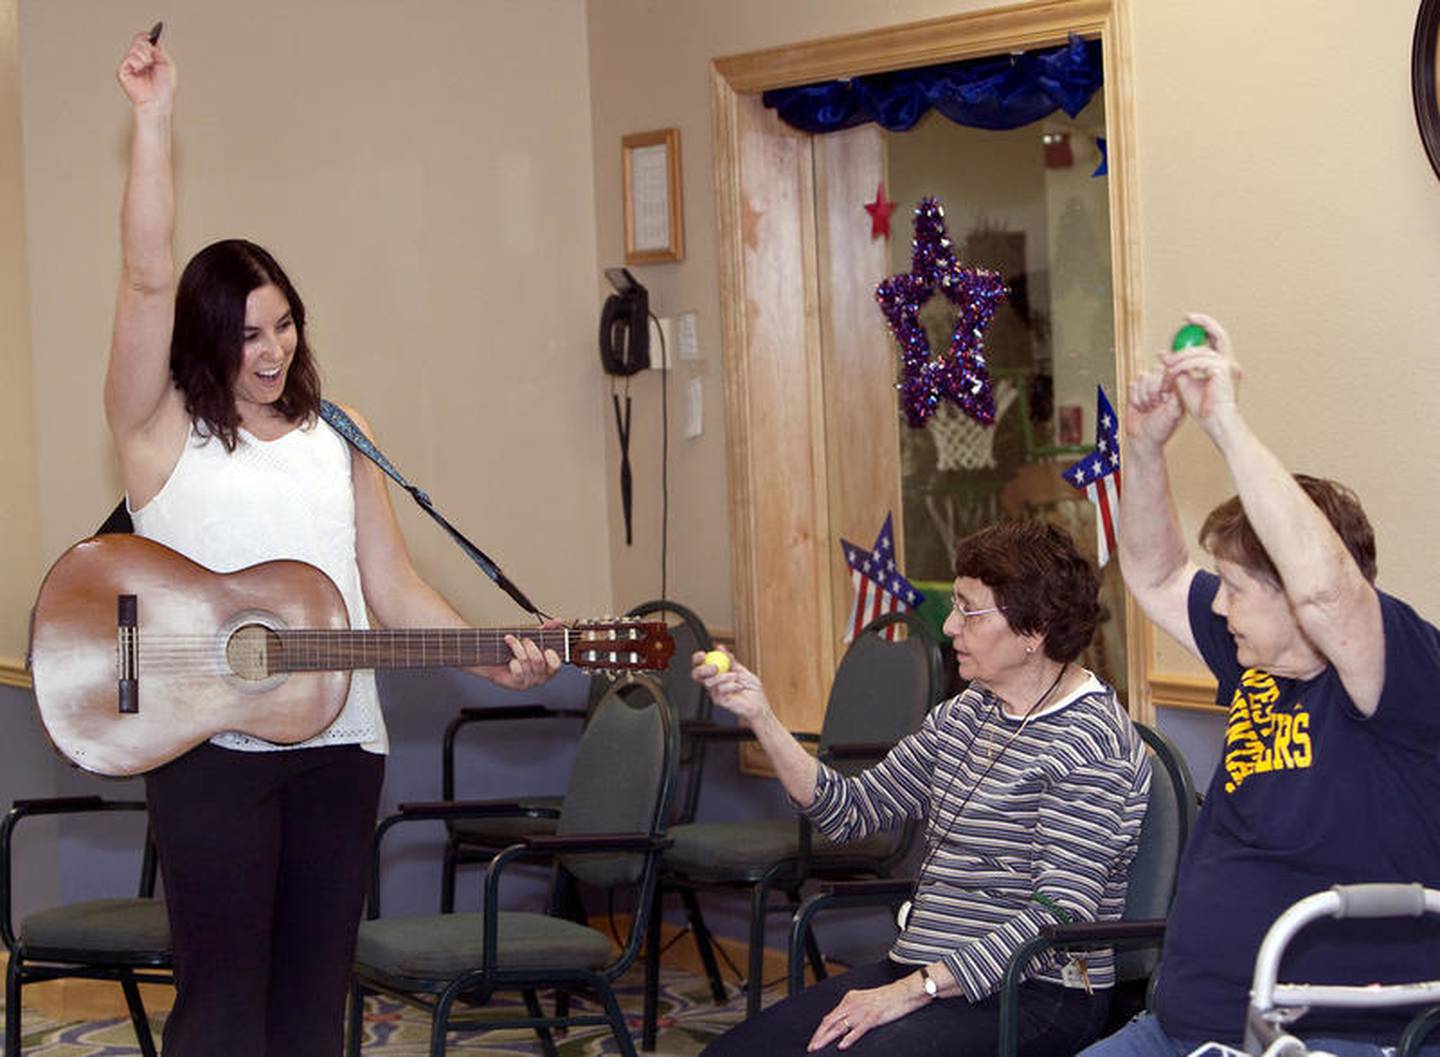 Stacy Jager music therapist sing along with Timbers of Shorewood residents Judy Kovic and Kathleen Stephens during the Music and Movement class at the at The Timbers of Shorewood retirement community Thursday, August 10, 2017, in Shorewood. The next class is Aug. 1.